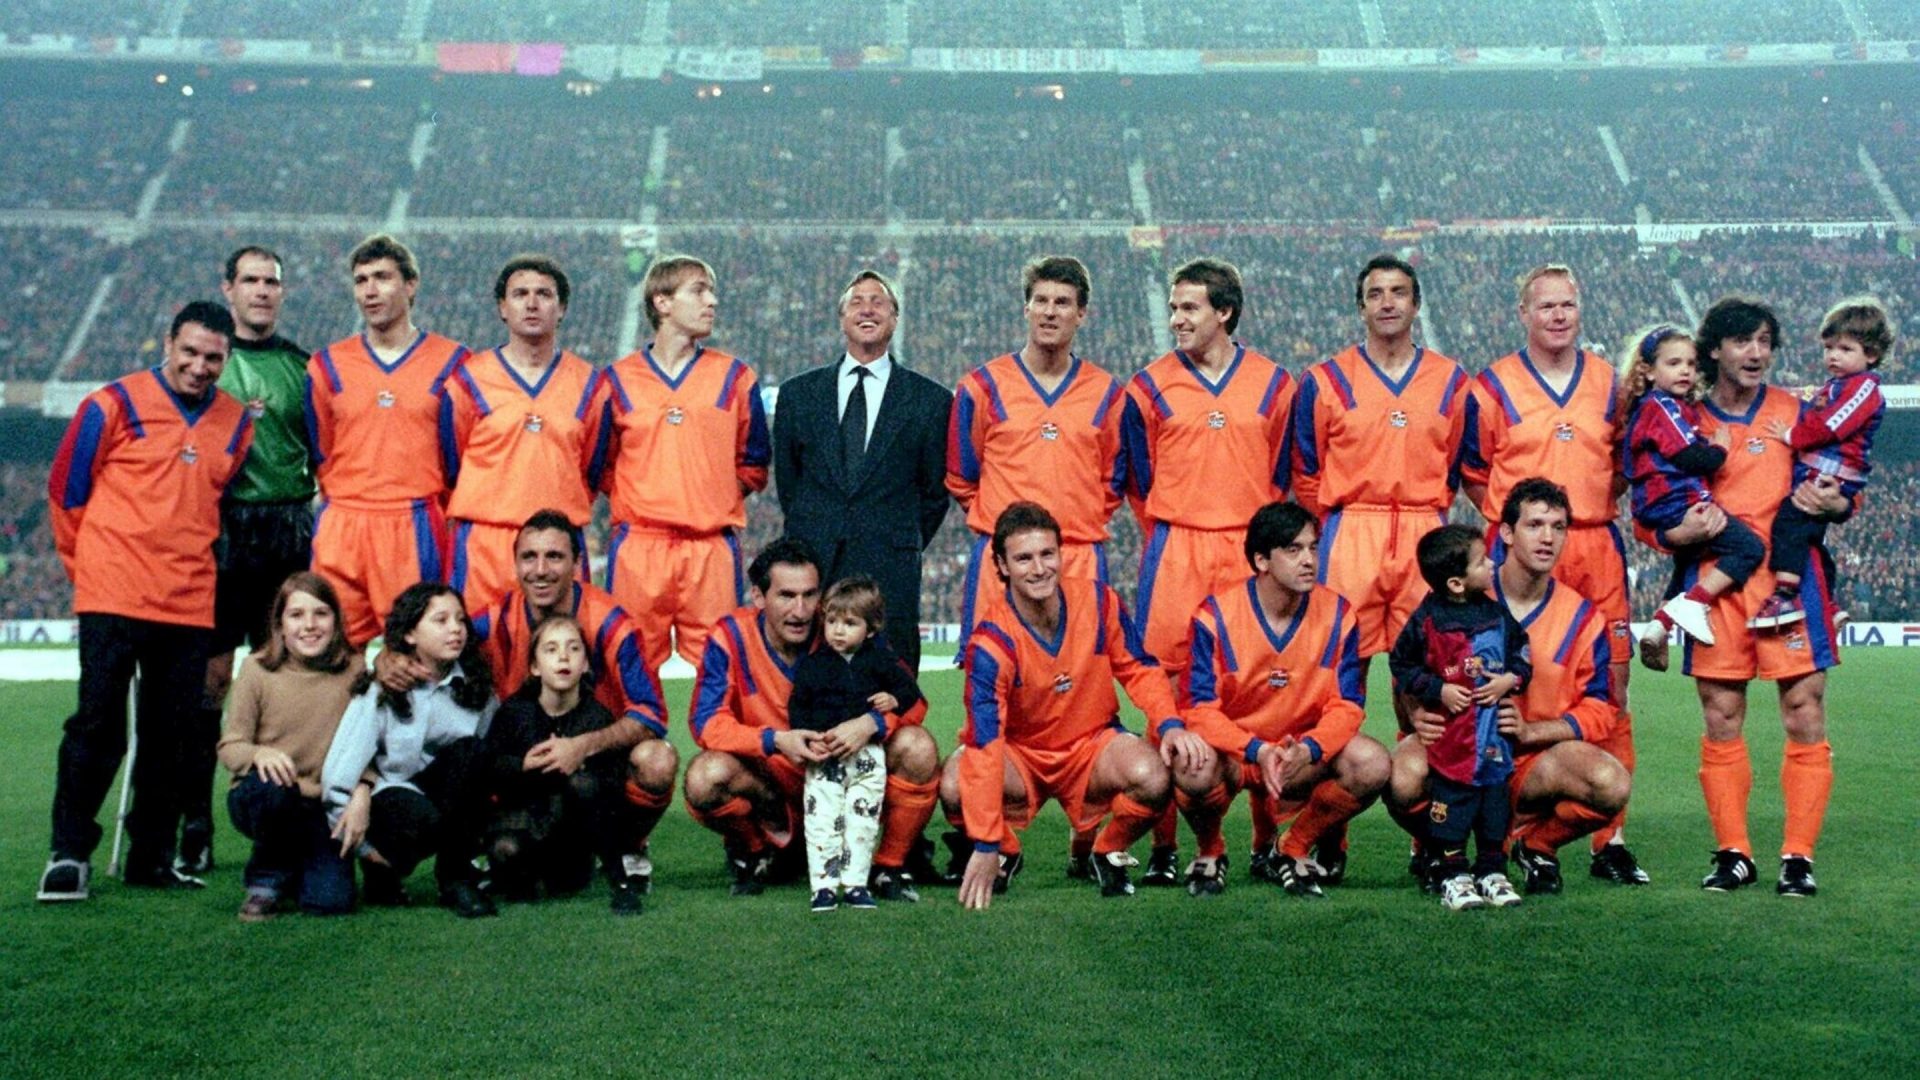 Barcelona’s 1992 Dream Team: The Facet That Laid the Foundation for the Membership’s Future Triumphs